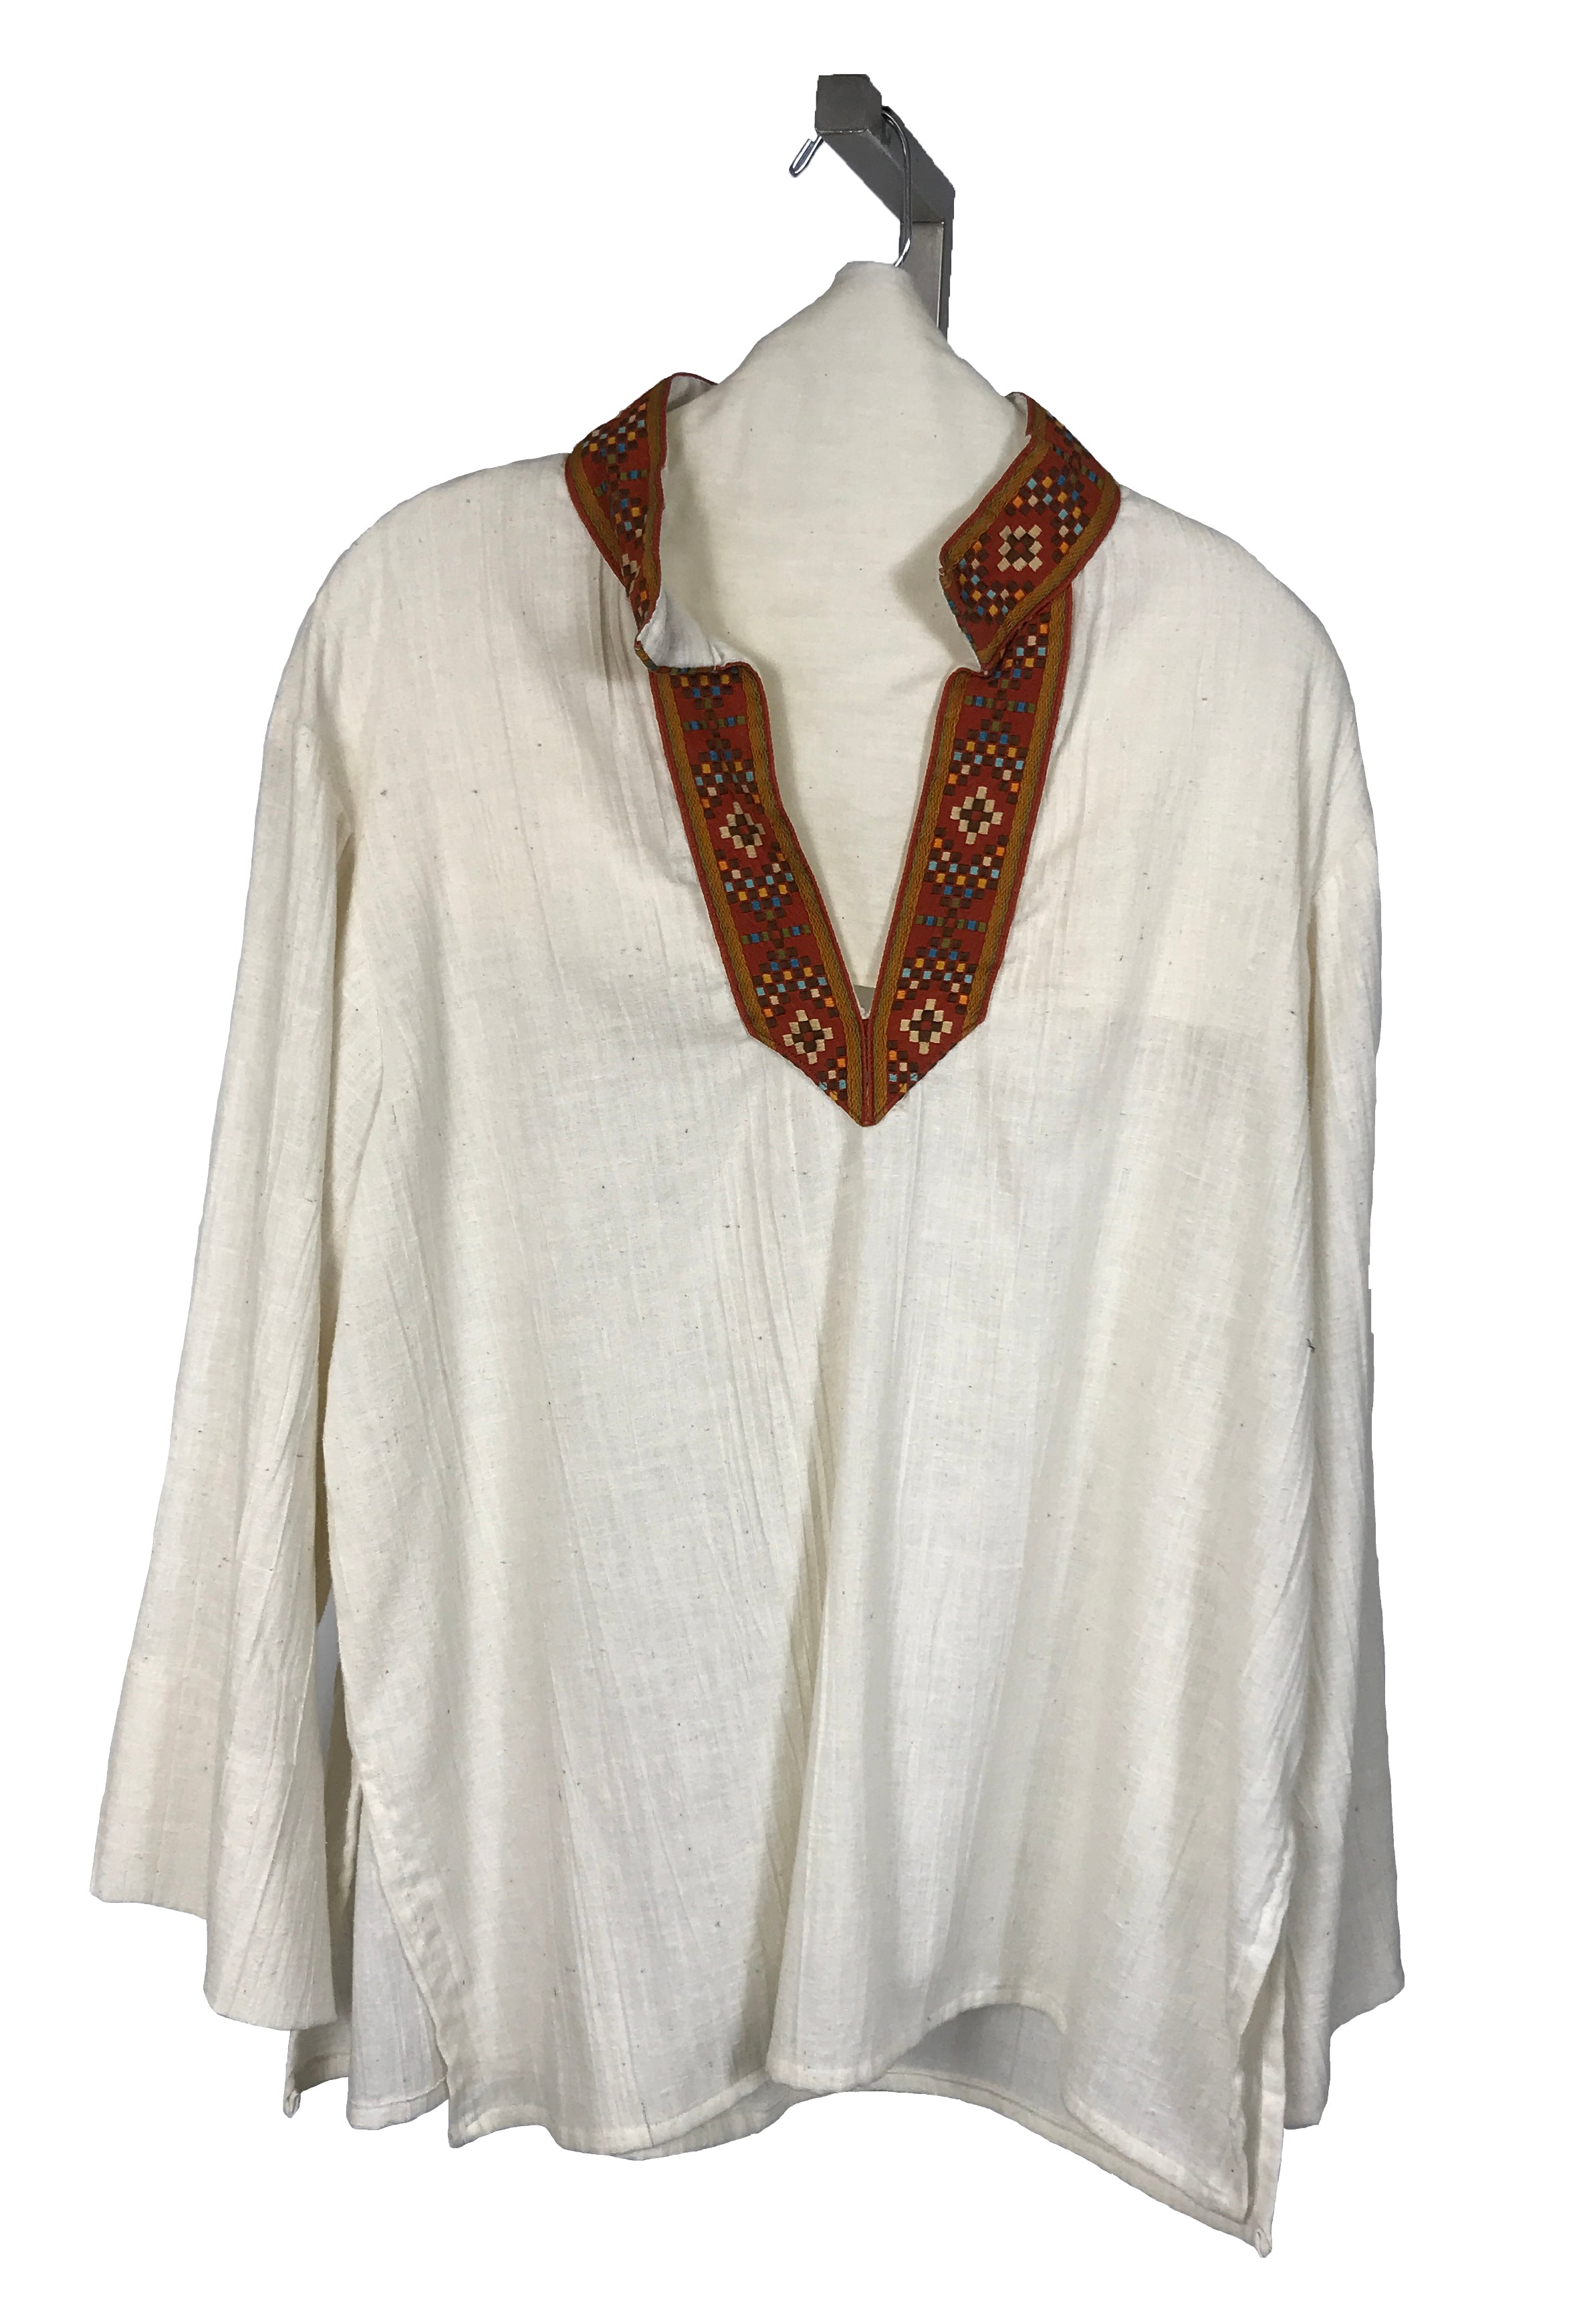 Vintage White Linen Shirt with Embroidered Collar